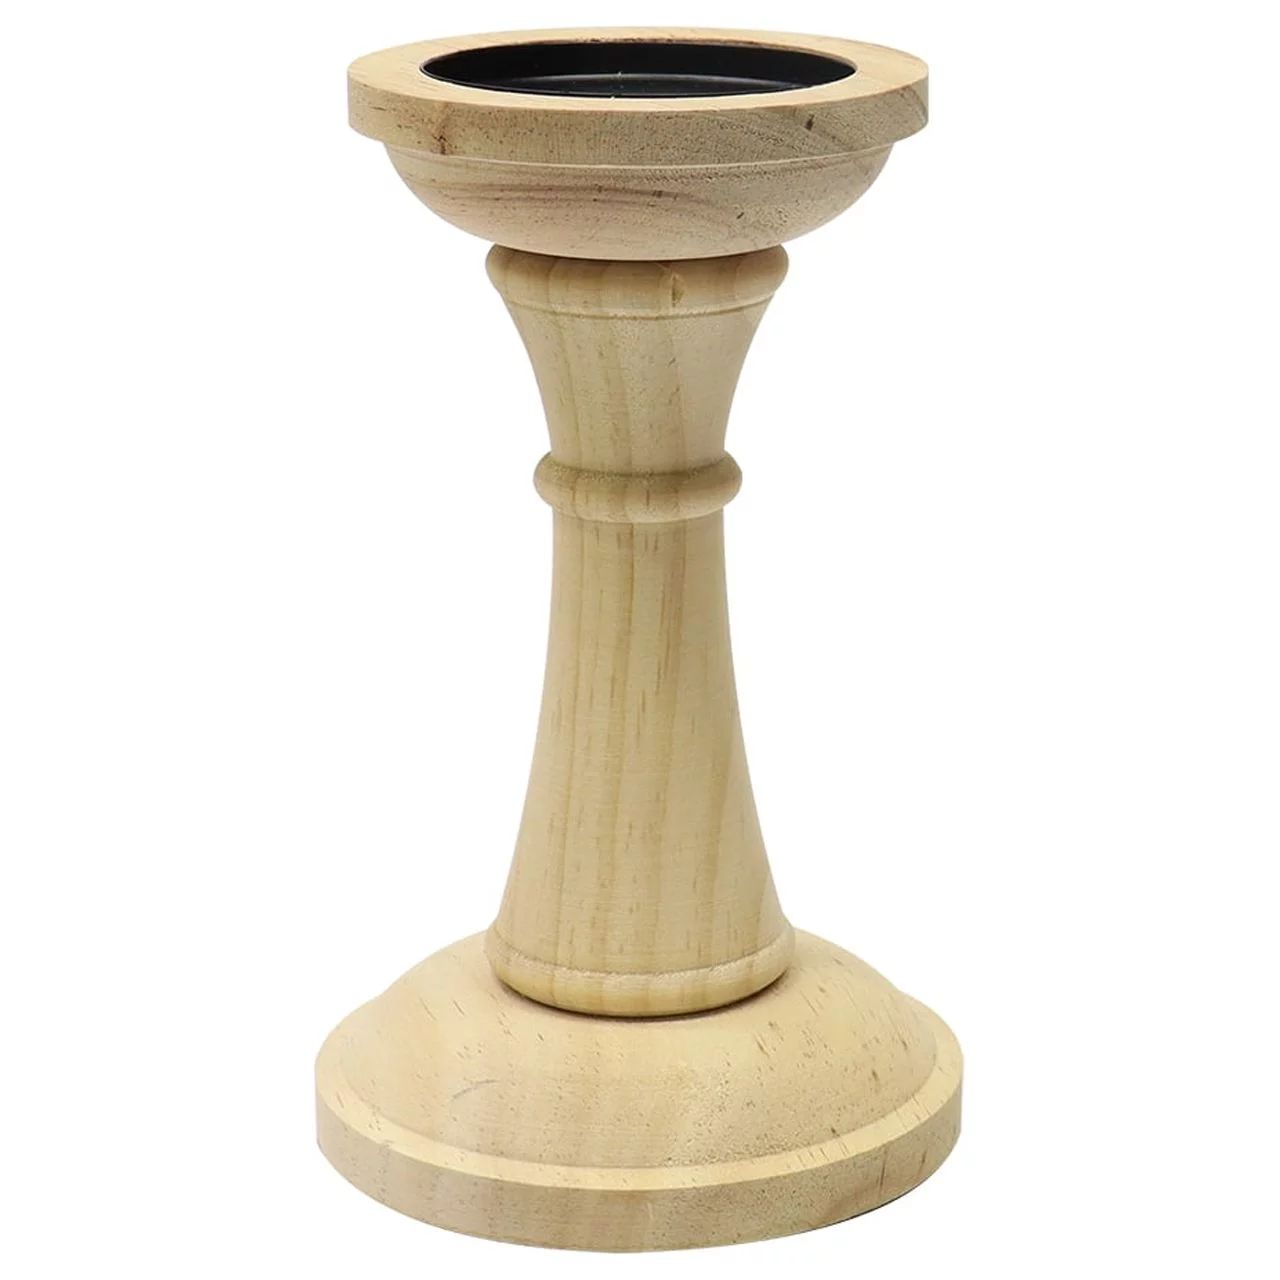 Better Homes & Garden 8" Large Pine Wood Stand Candle Holder | Walmart (US)